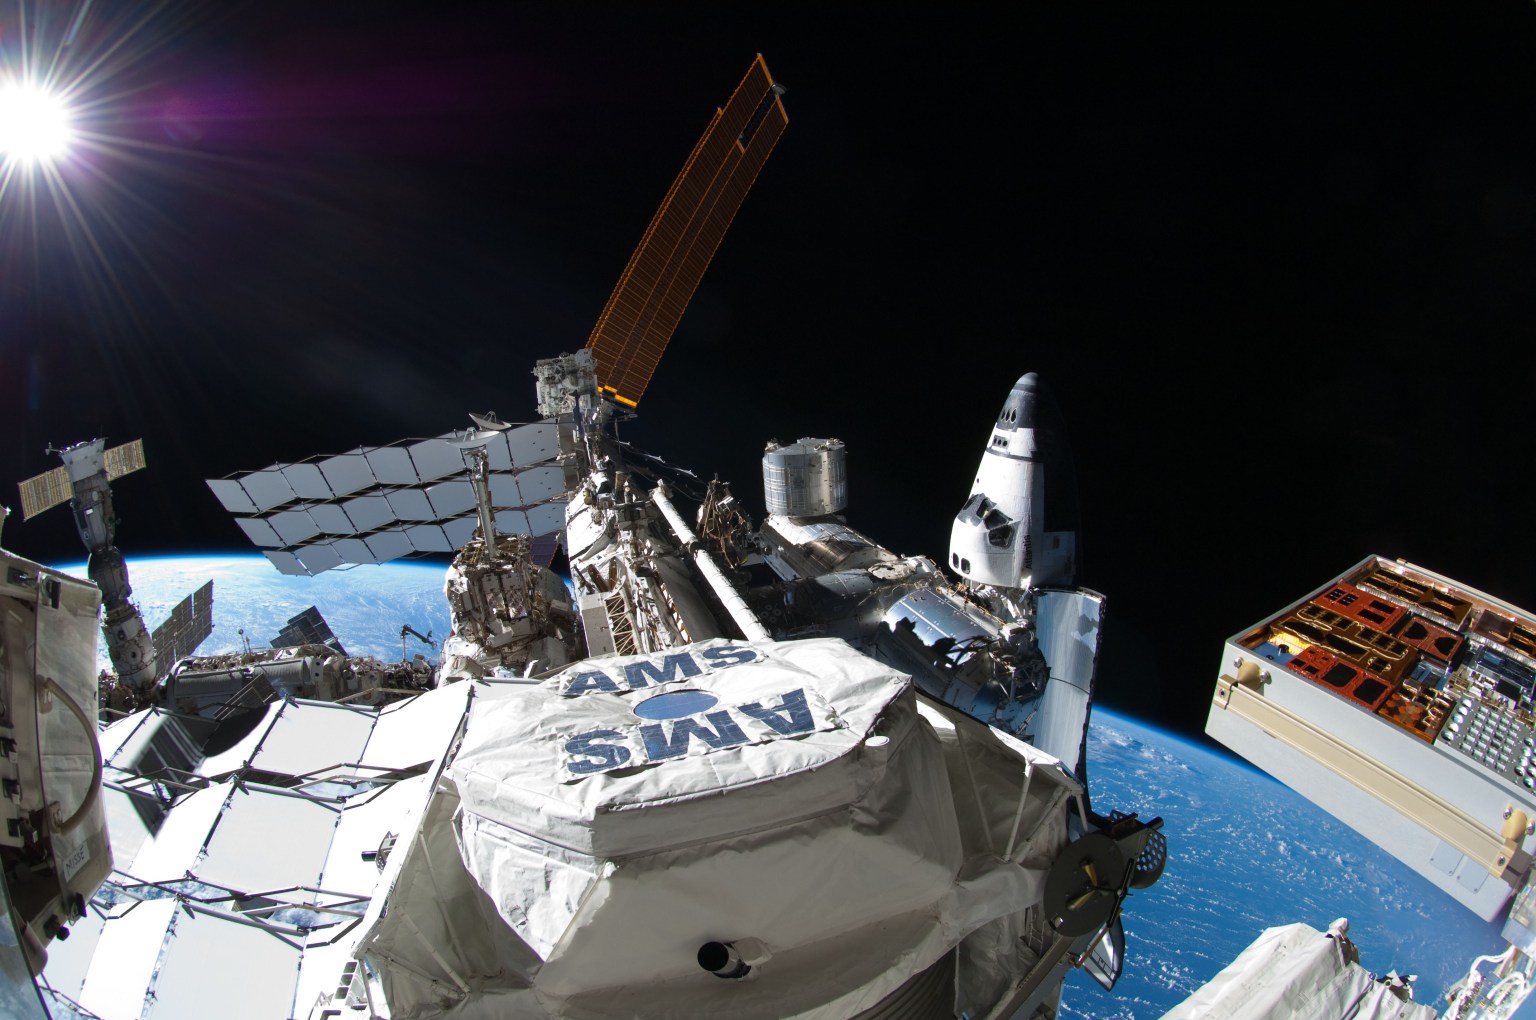 This picture, photographed by NASA astronaut Ron Garan during the spacewalk conducted on July 12, 2011, shows the International Space Station with space shuttle Atlantis docked at right and a Russian Soyuz docked to Pirs, below the sun at far left. In the center foreground is the Alpha Magnetic Spectrometer (AMS) experiment installed during the STS-134 mission. AMS is a state-of-the-art particle physics detector designed to use the unique environment of space to advance knowledge of the universe and lead to the understanding of the universe's origin by searching for antimatter and dark matter, and measuring cosmic rays.